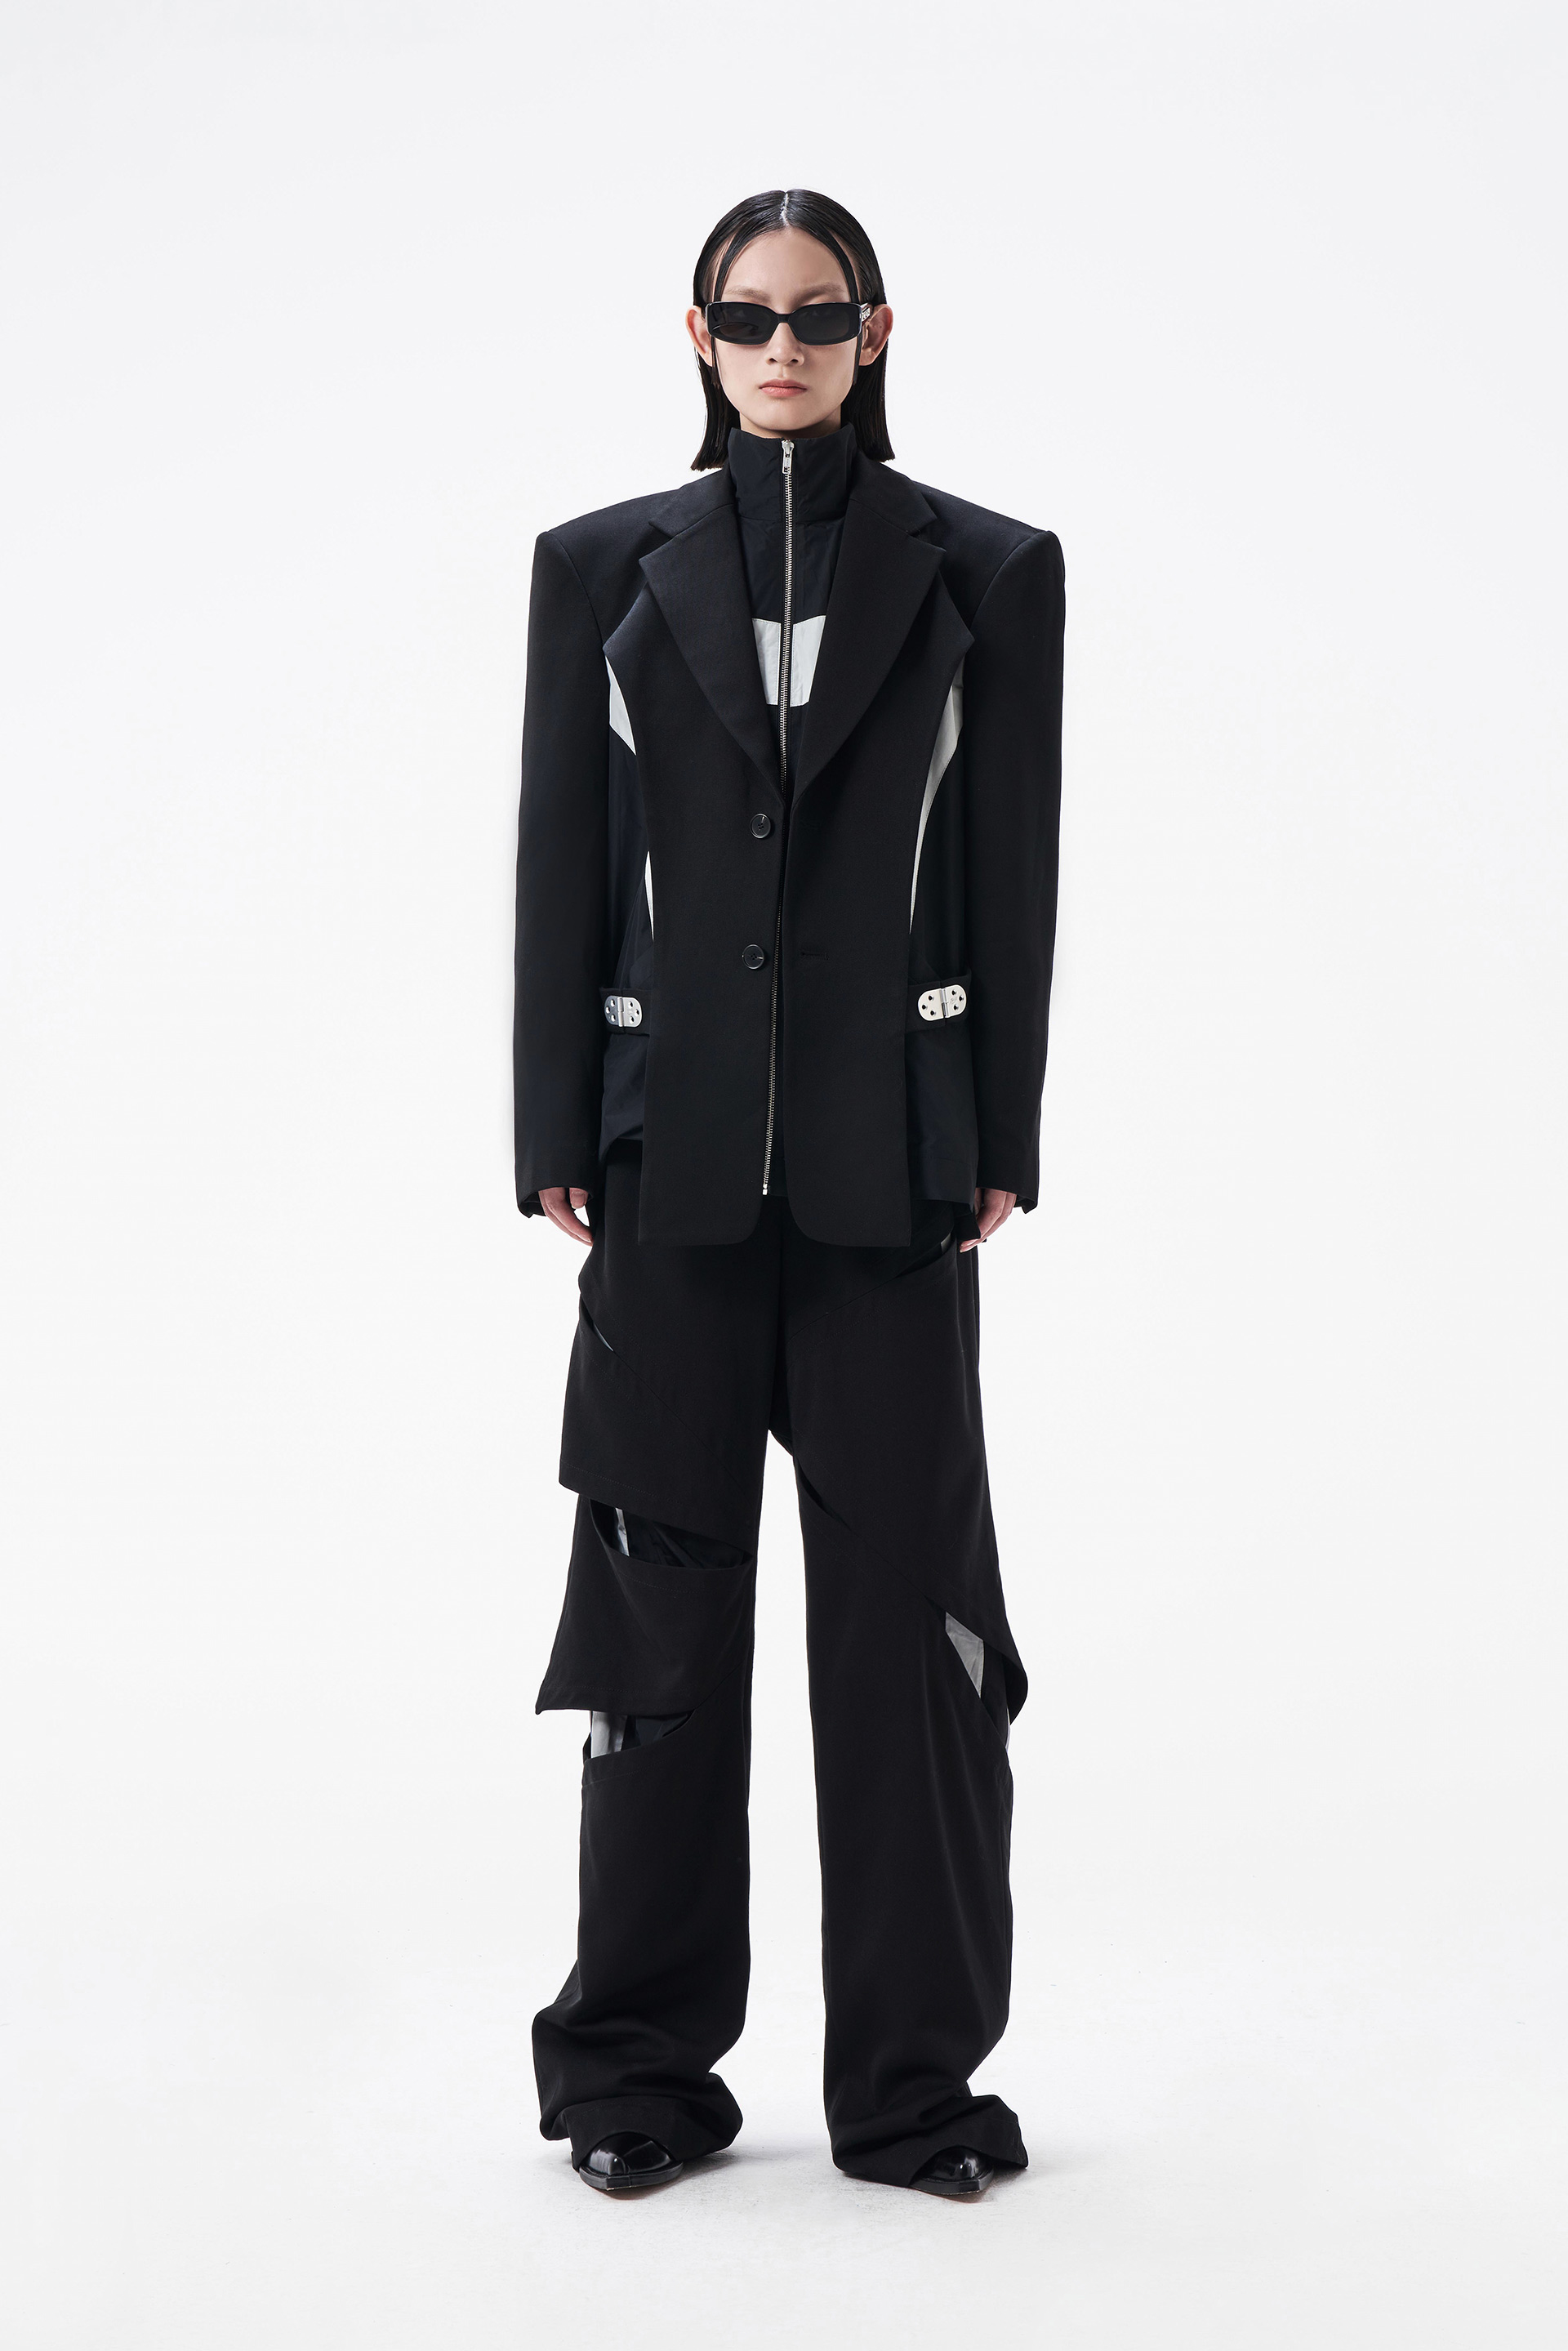 「JUNCTION」FAKE TWO -PIECE CUT -OUT SPLICING SUIT (women)